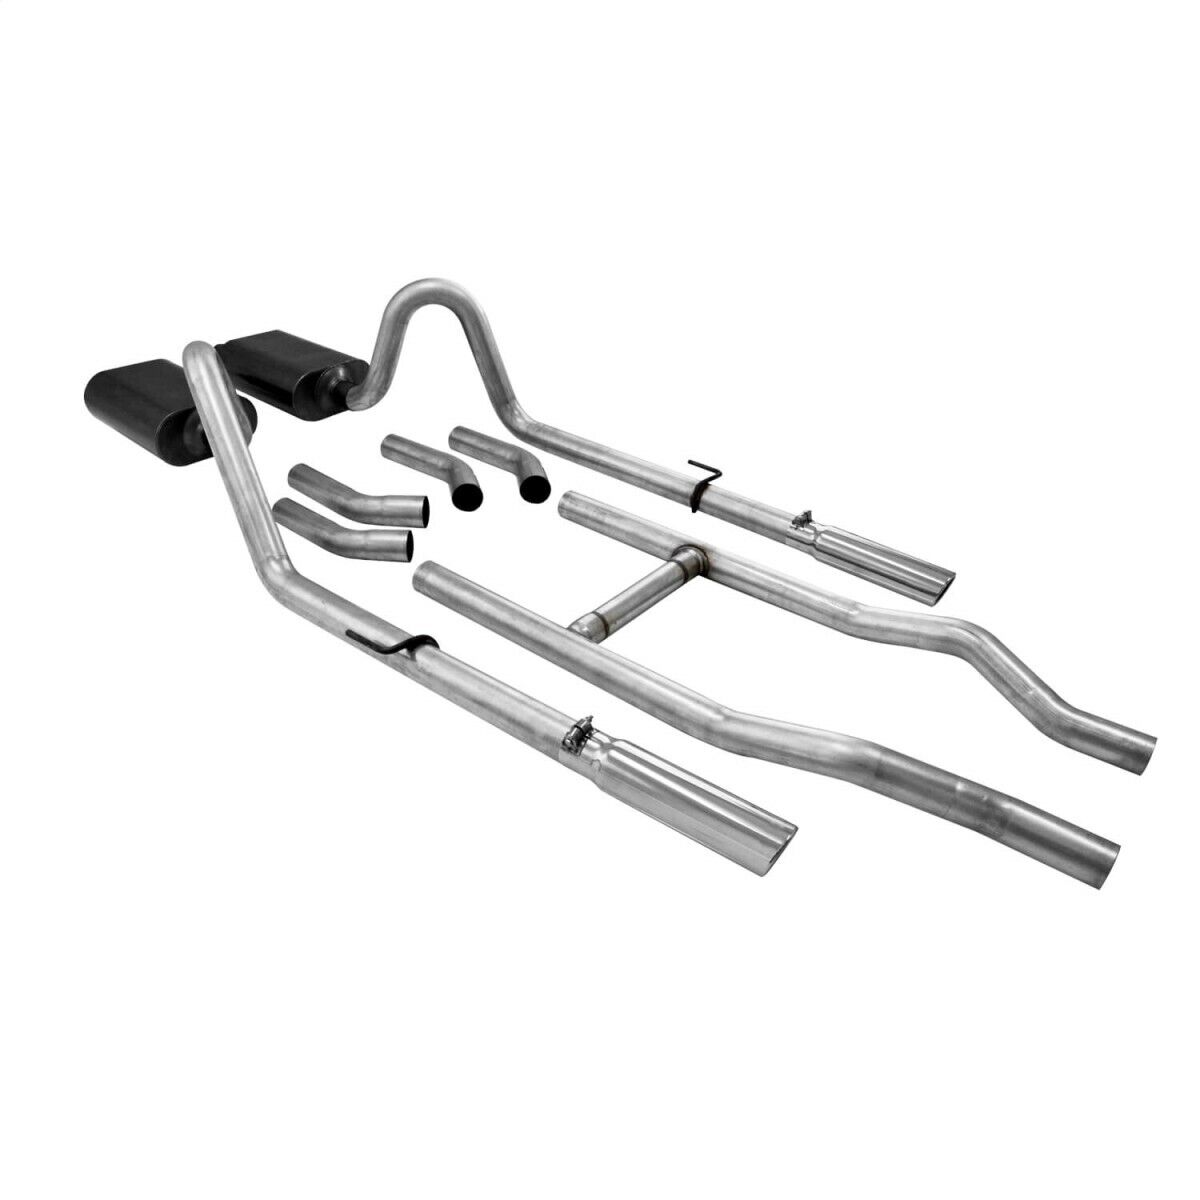 817174 Flowmaster Exhaust System for Chevy 2-10 Series Coupe Sedan Bel Air 55-57